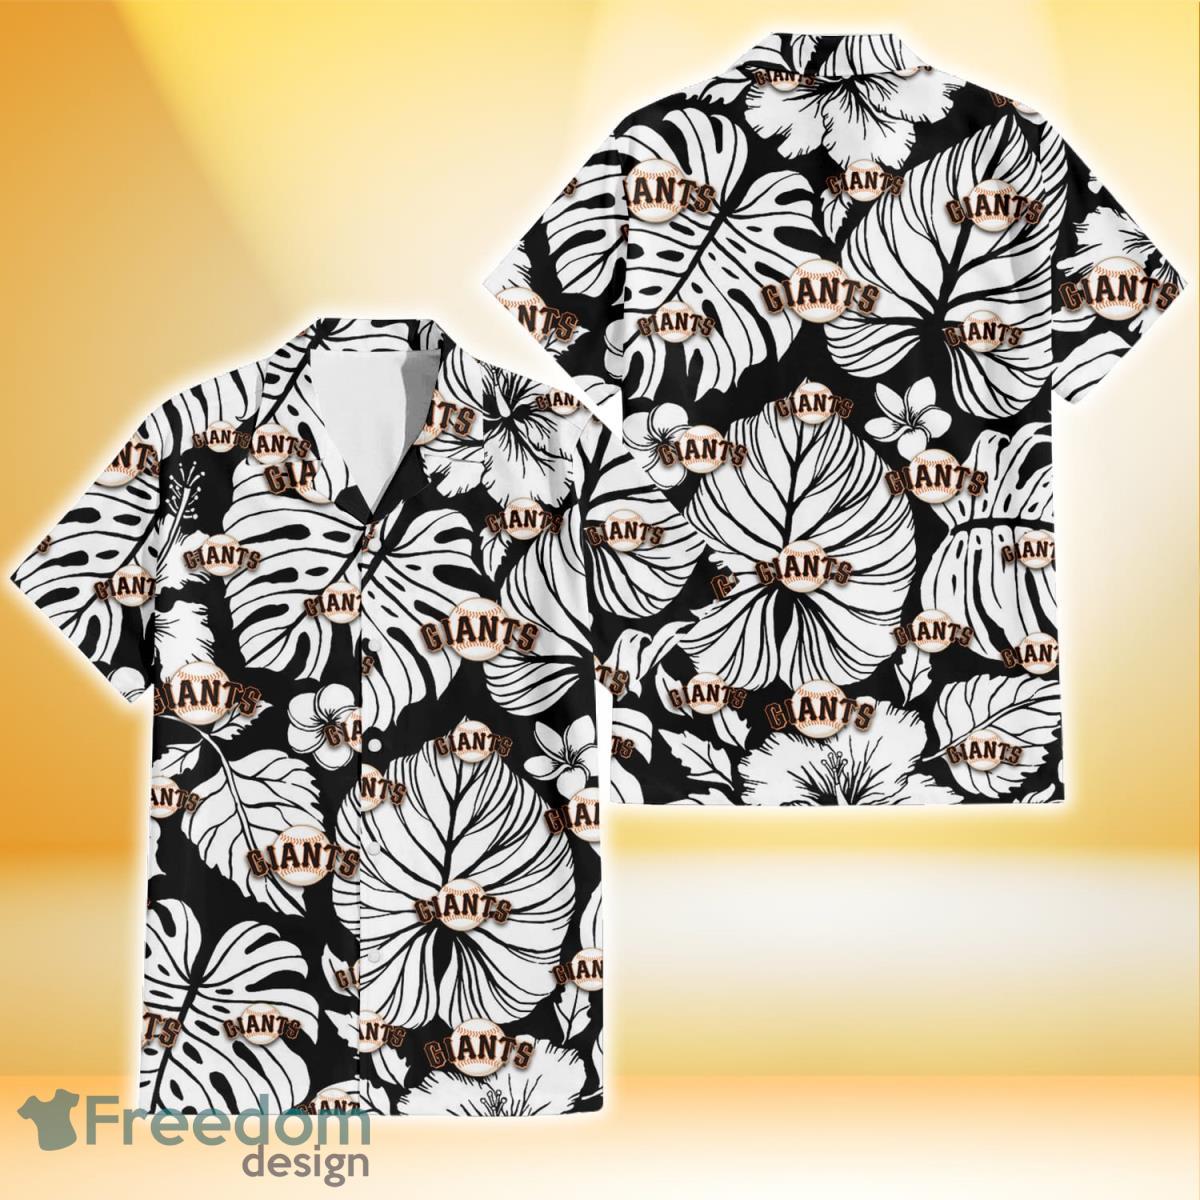 Chicago Cubs White Hibiscus Porcelain Flower Palm Leaf Black 3D Hawaiian  Shirt Gift For Fans - Freedomdesign